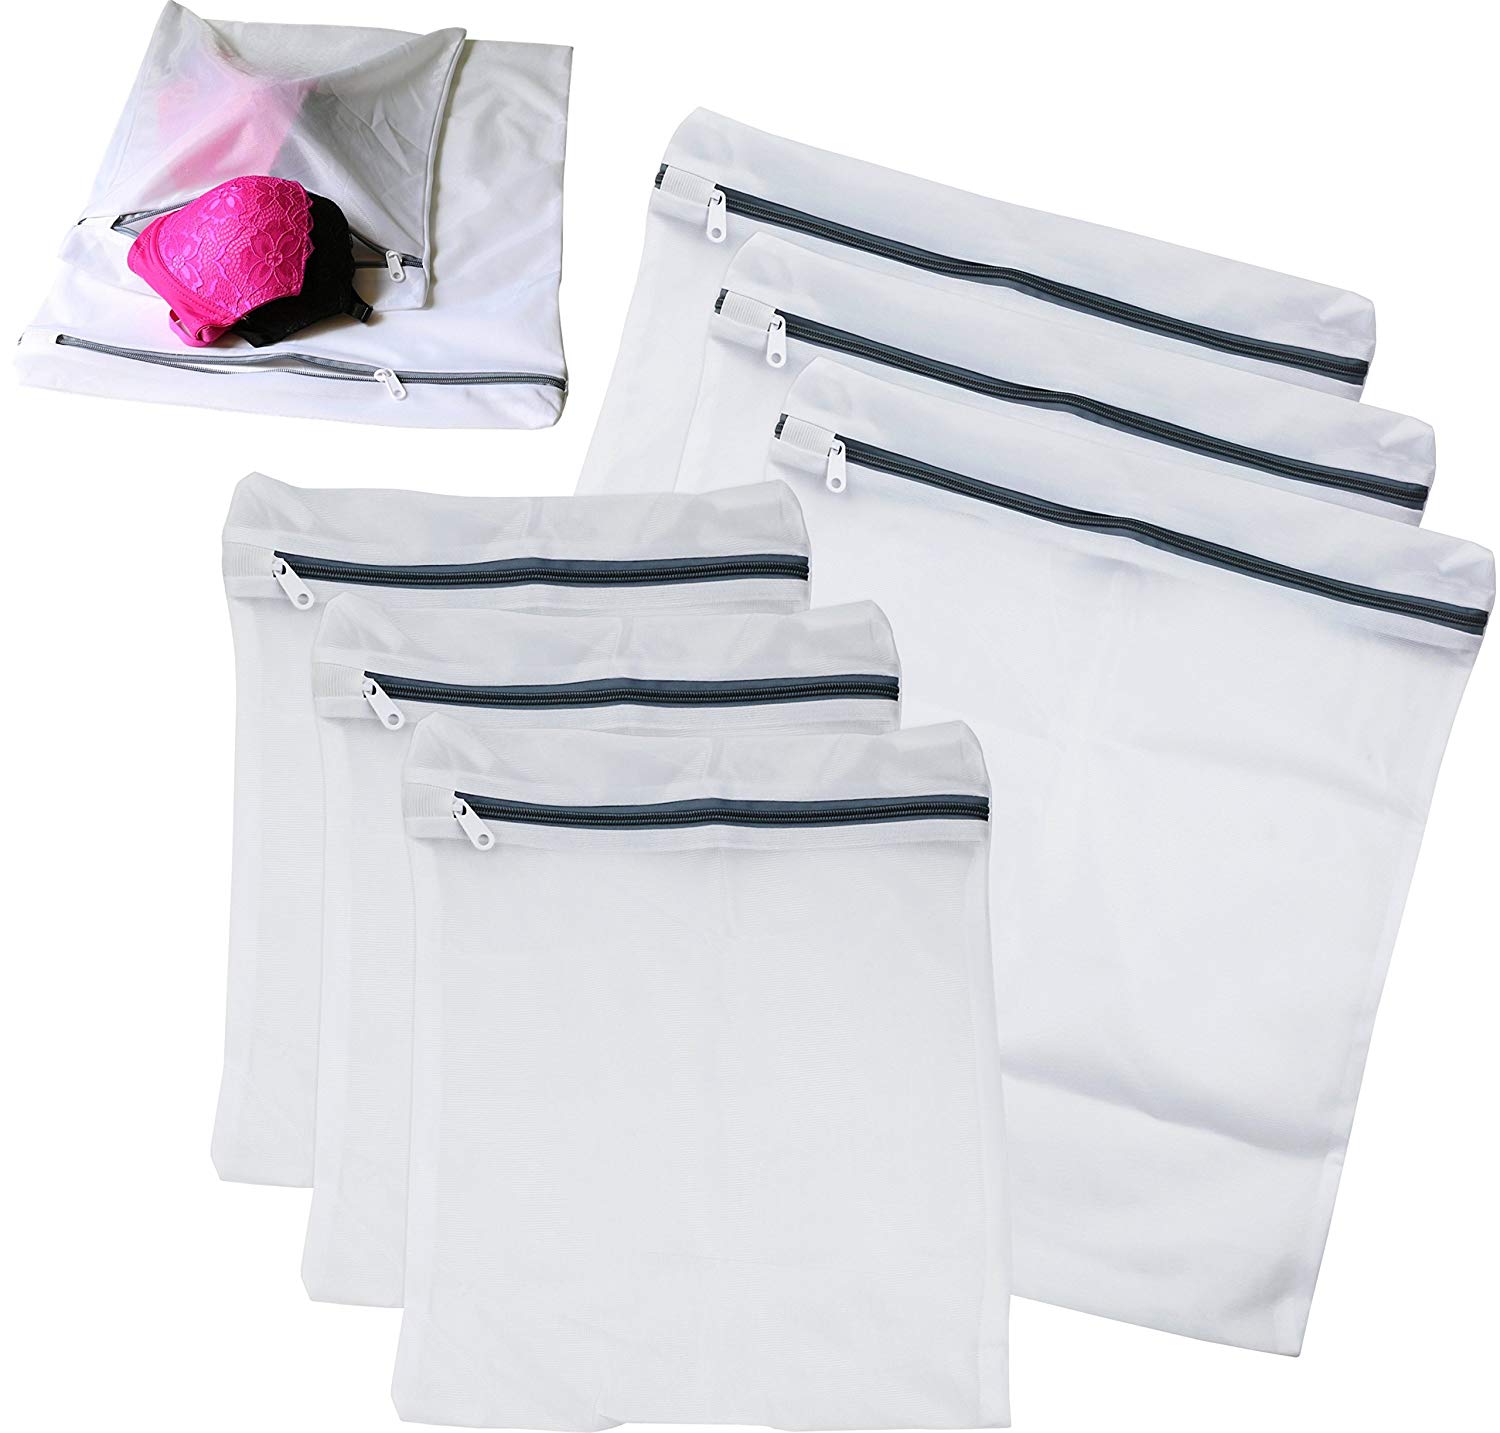 Simple Houseware Mesh Delicates Zippered Laundry Bags, 5-Pack